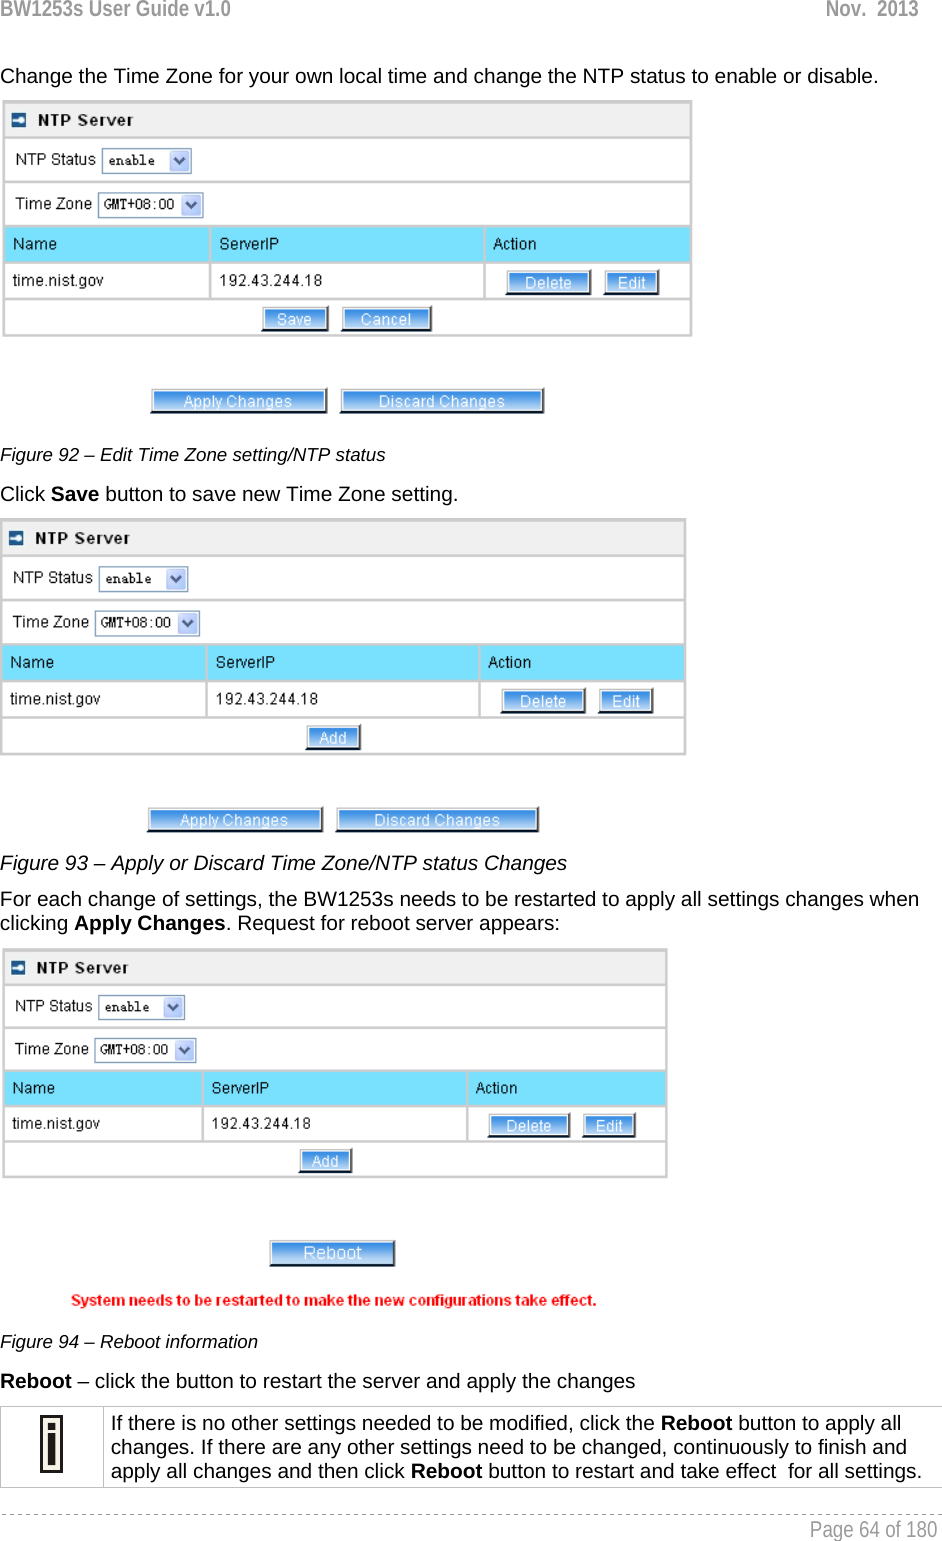 BW1253s User Guide v1.0  Nov.  2013     Page 64 of 180   Change the Time Zone for your own local time and change the NTP status to enable or disable.  Figure 92 – Edit Time Zone setting/NTP status Click Save button to save new Time Zone setting.  Figure 93 – Apply or Discard Time Zone/NTP status Changes For each change of settings, the BW1253s needs to be restarted to apply all settings changes when clicking Apply Changes. Request for reboot server appears:  Figure 94 – Reboot information Reboot – click the button to restart the server and apply the changes  If there is no other settings needed to be modified, click the Reboot button to apply all changes. If there are any other settings need to be changed, continuously to finish and apply all changes and then click Reboot button to restart and take effect  for all settings. 